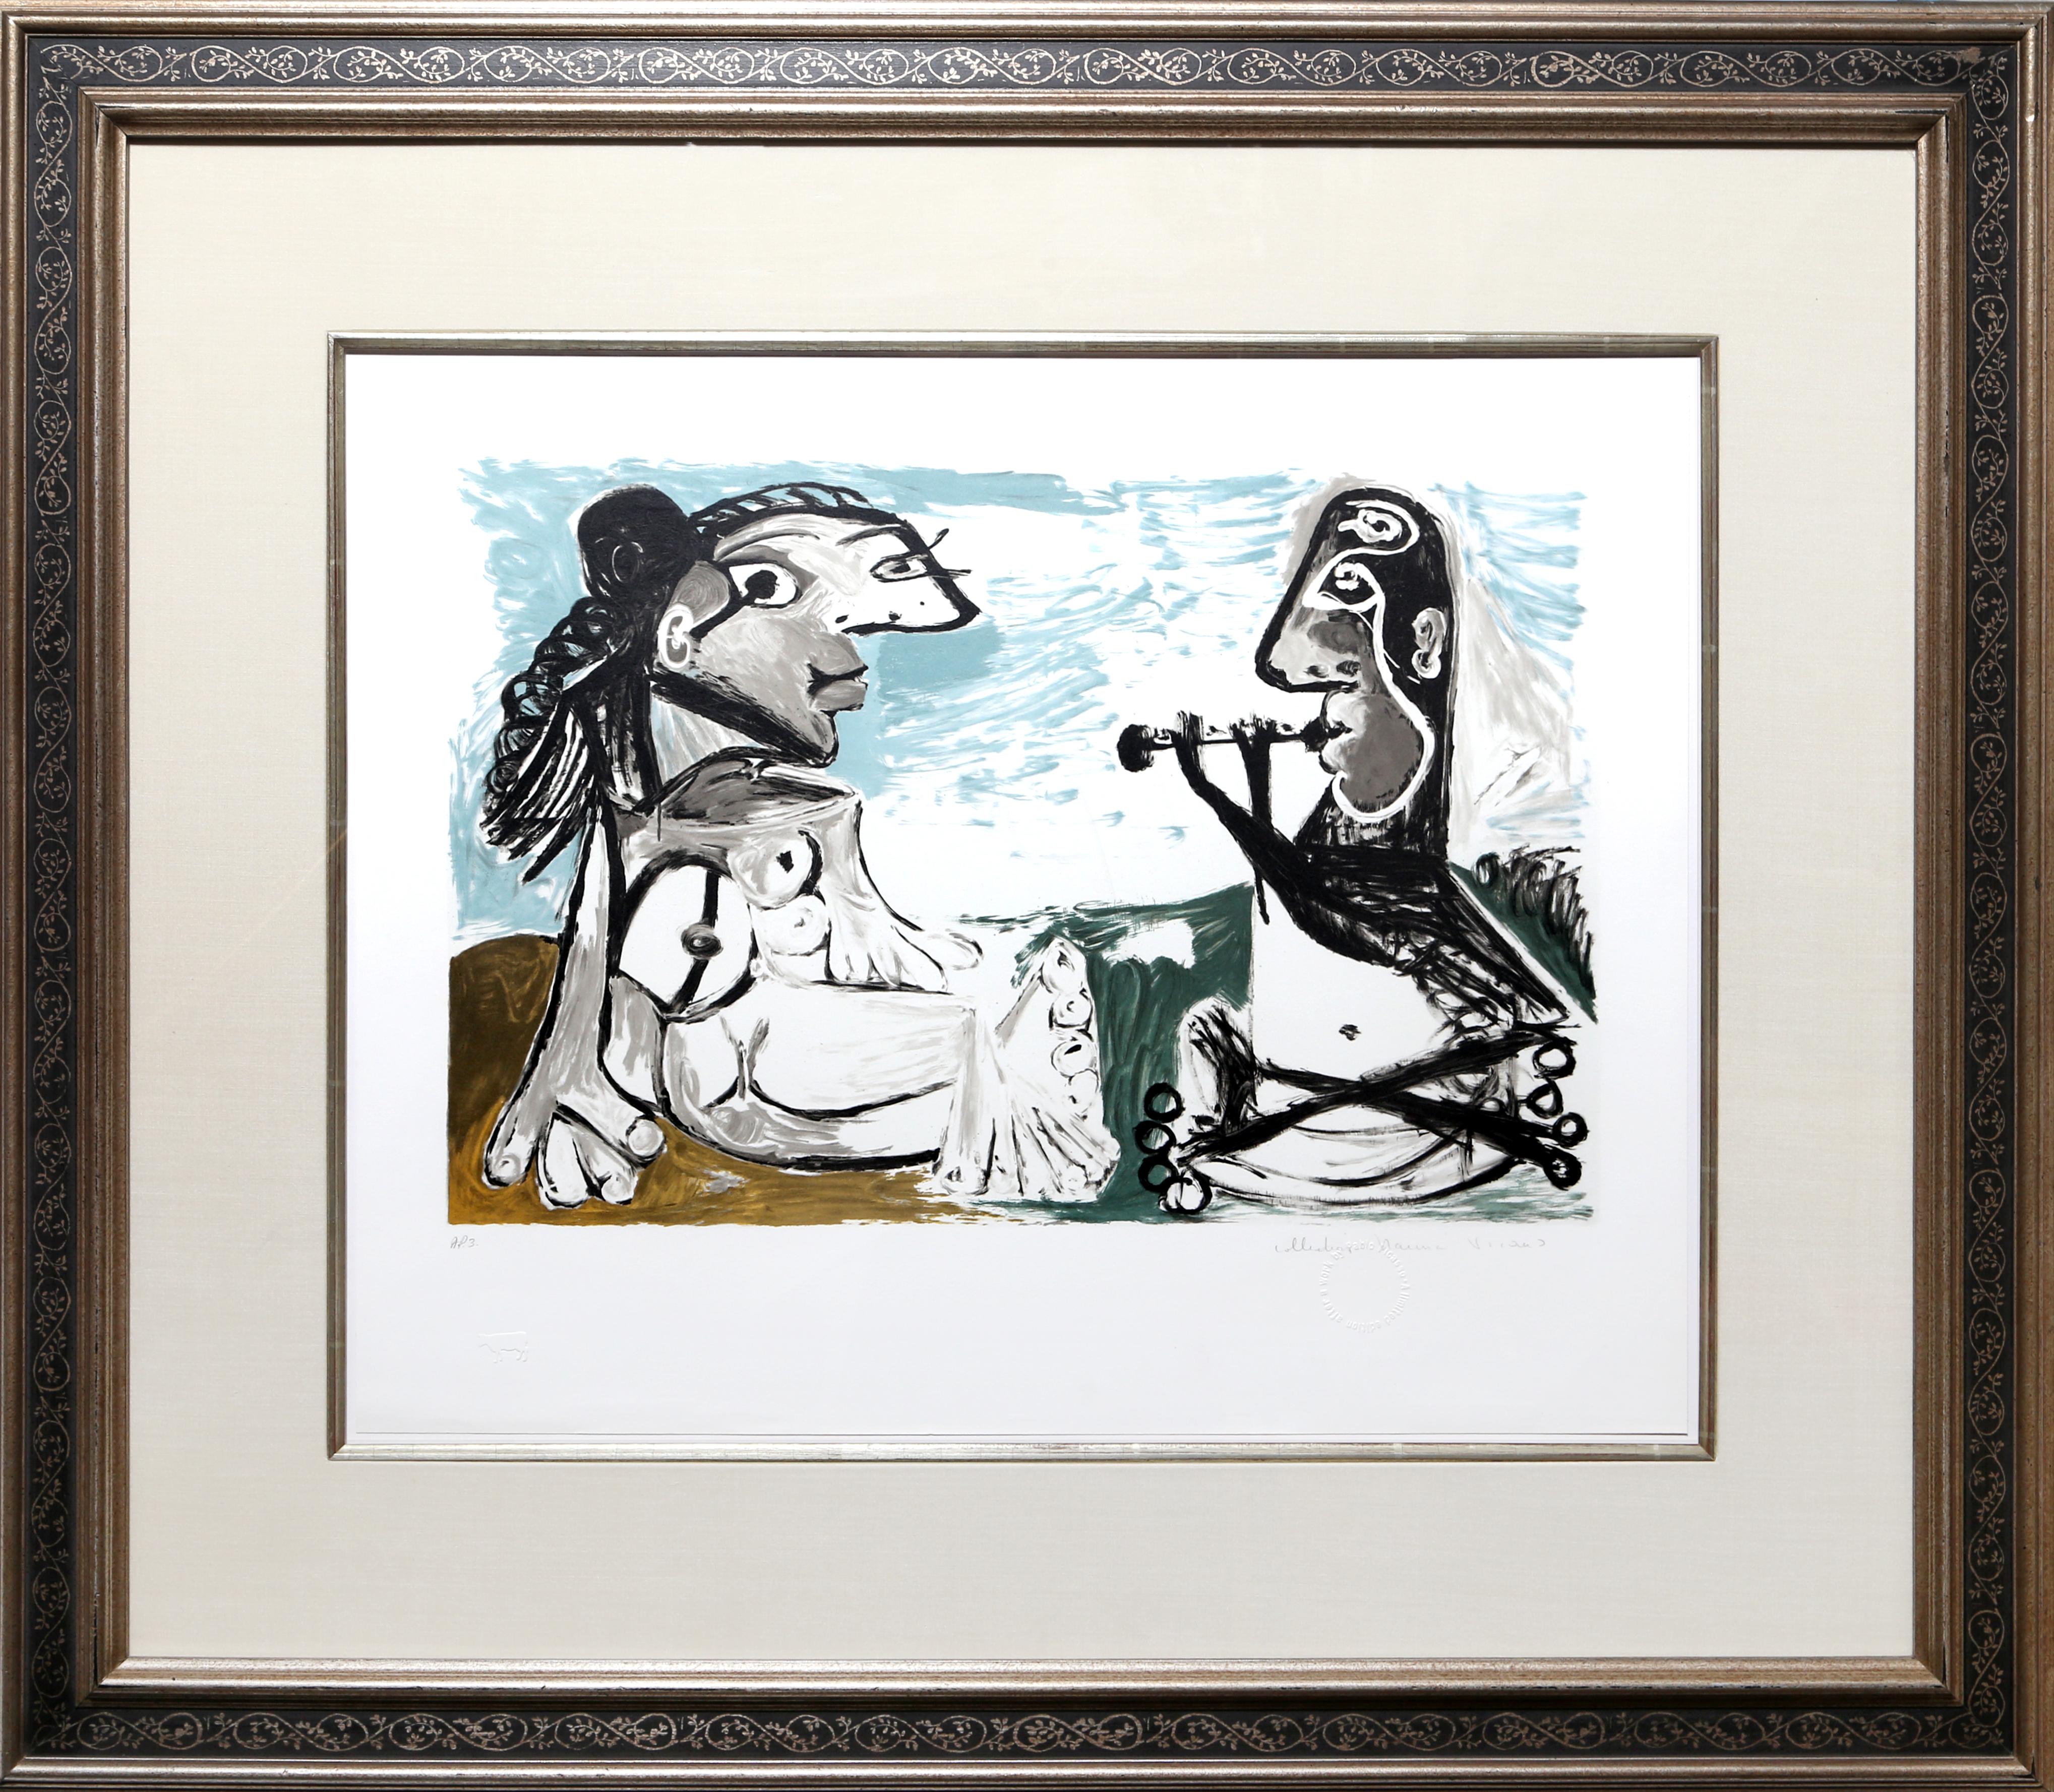 A lithograph from the Marina Picasso Estate Collection after the Pablo Picasso painting "Femme Assise et Joueur de Flute".  The original painting was completed in 1967. In the 1970's after Picasso's death, Marina Picasso, his granddaughter,